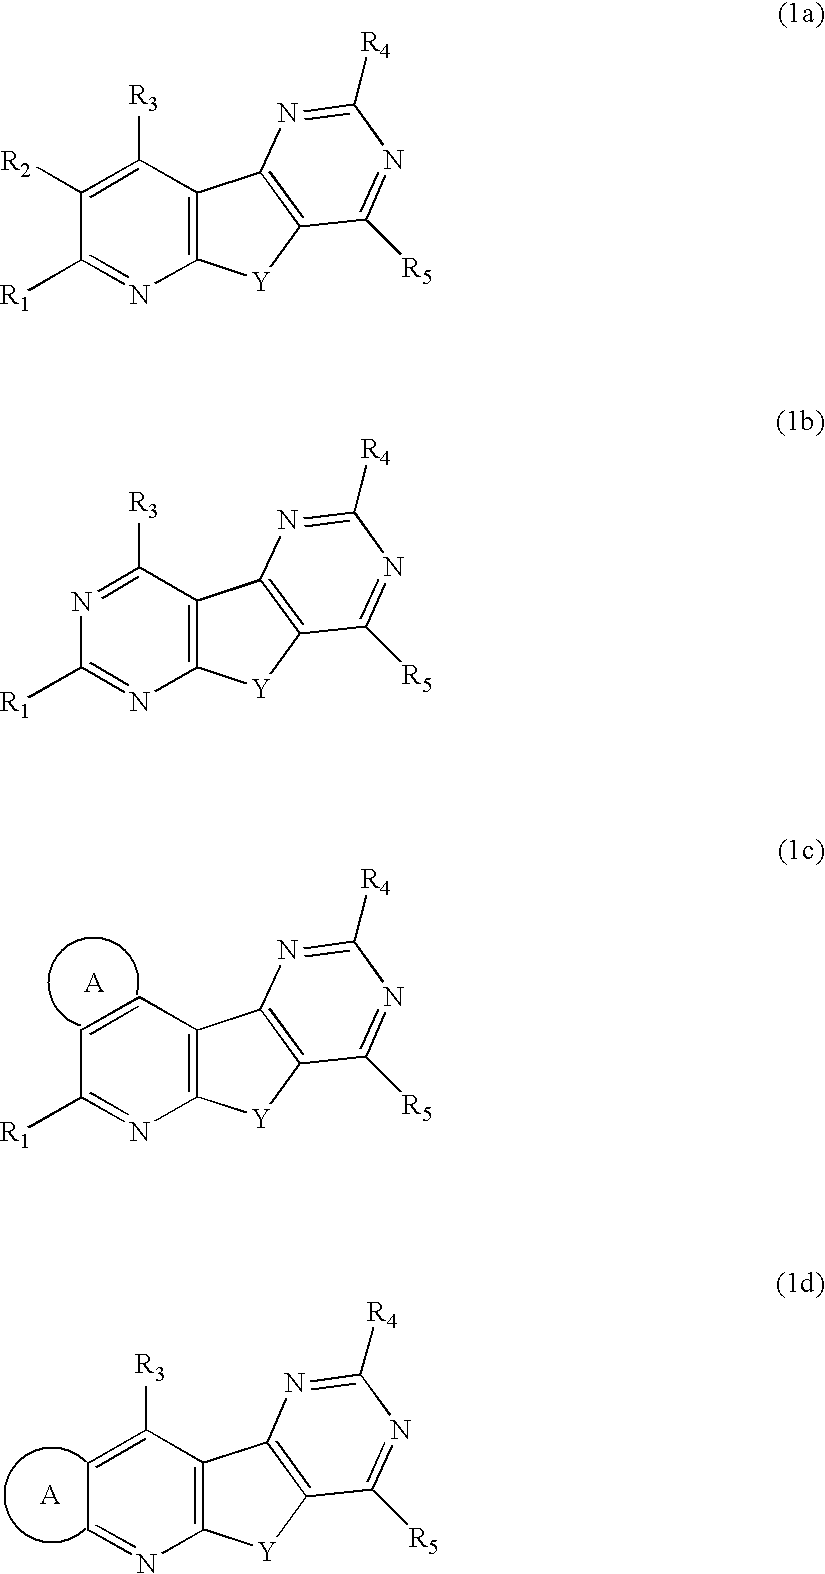 Substituted pyrido [3', 2': 4, 5] thieno [3, 2-d] pyrimidines and pyrido [3', 2': 4, 5] furo [3, 2-d] pyrimidines used as inhibitors of the pde-4 and/or the release of tnf-alpha